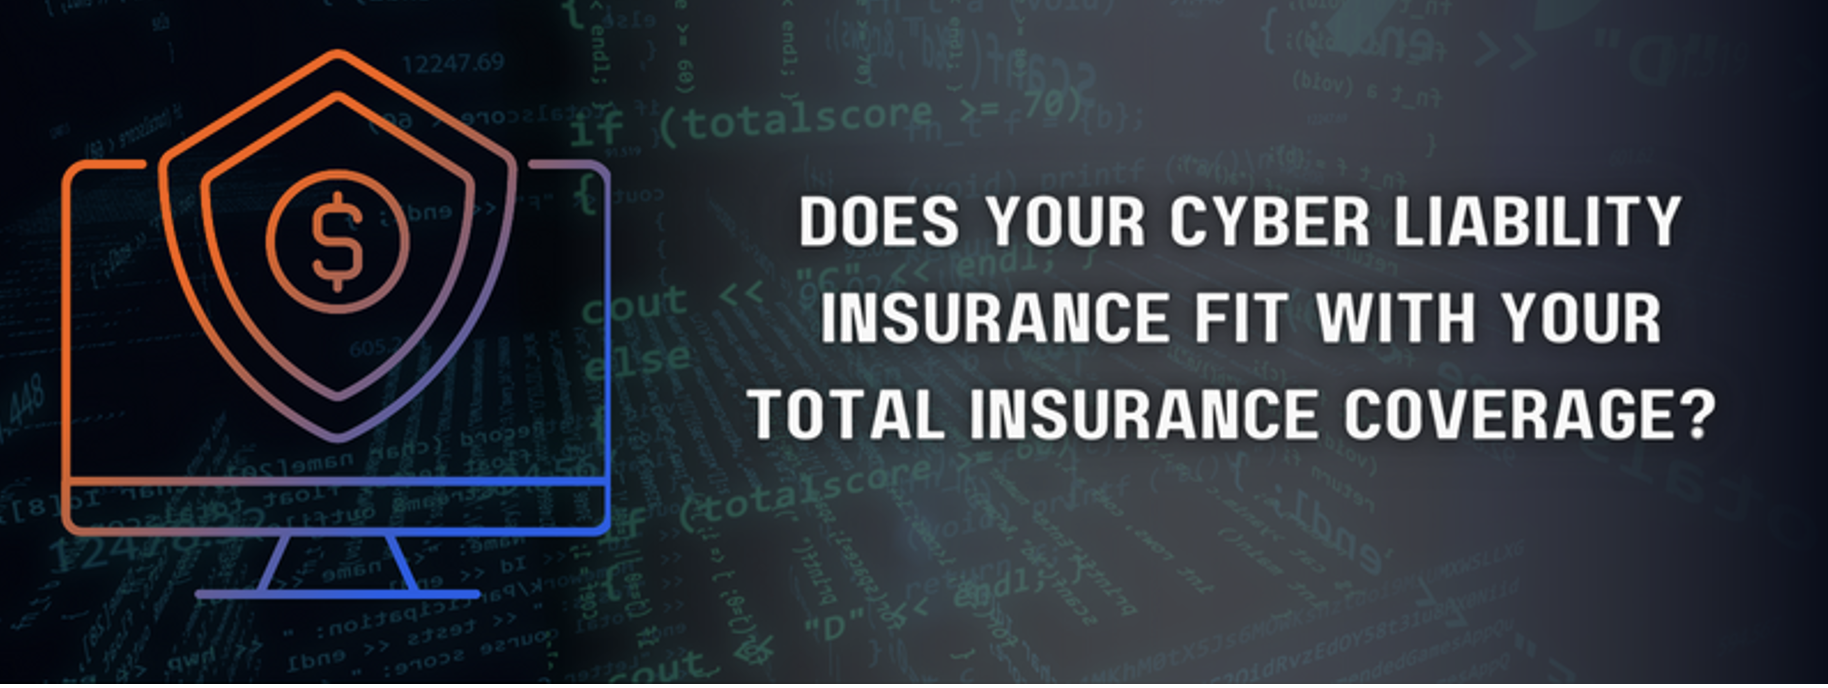 Does Your Cyber Liability Insurance Fit with Your Total Insurance Coverage?